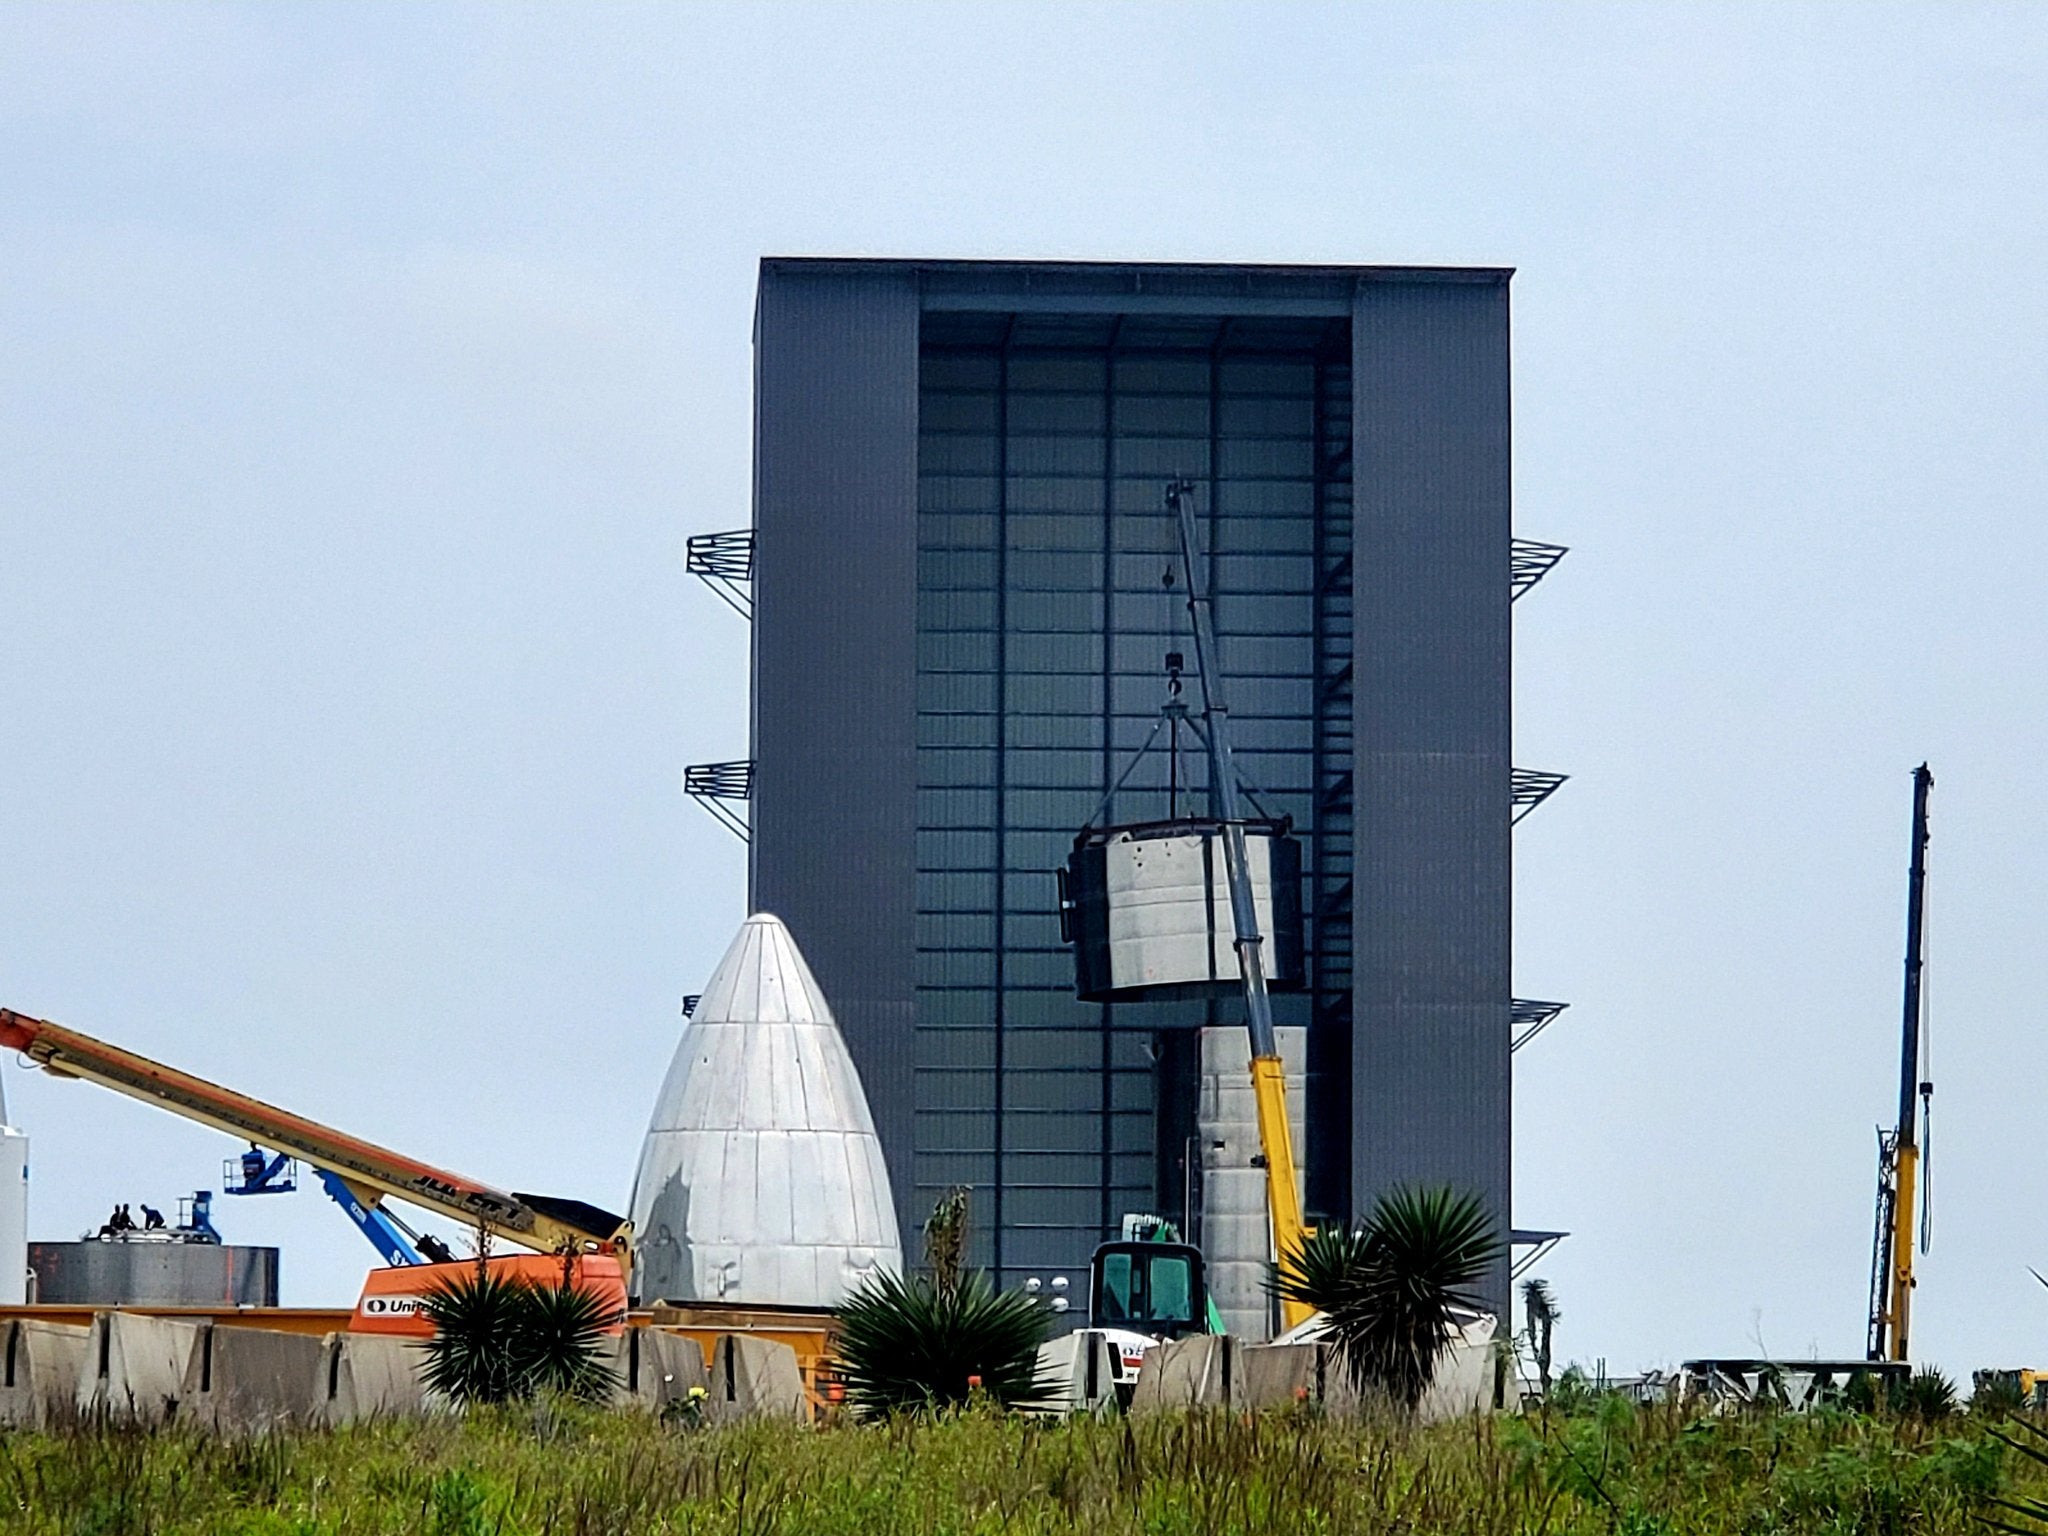 SpaceX is rapidly building the fourth prototype of Starship in Texas